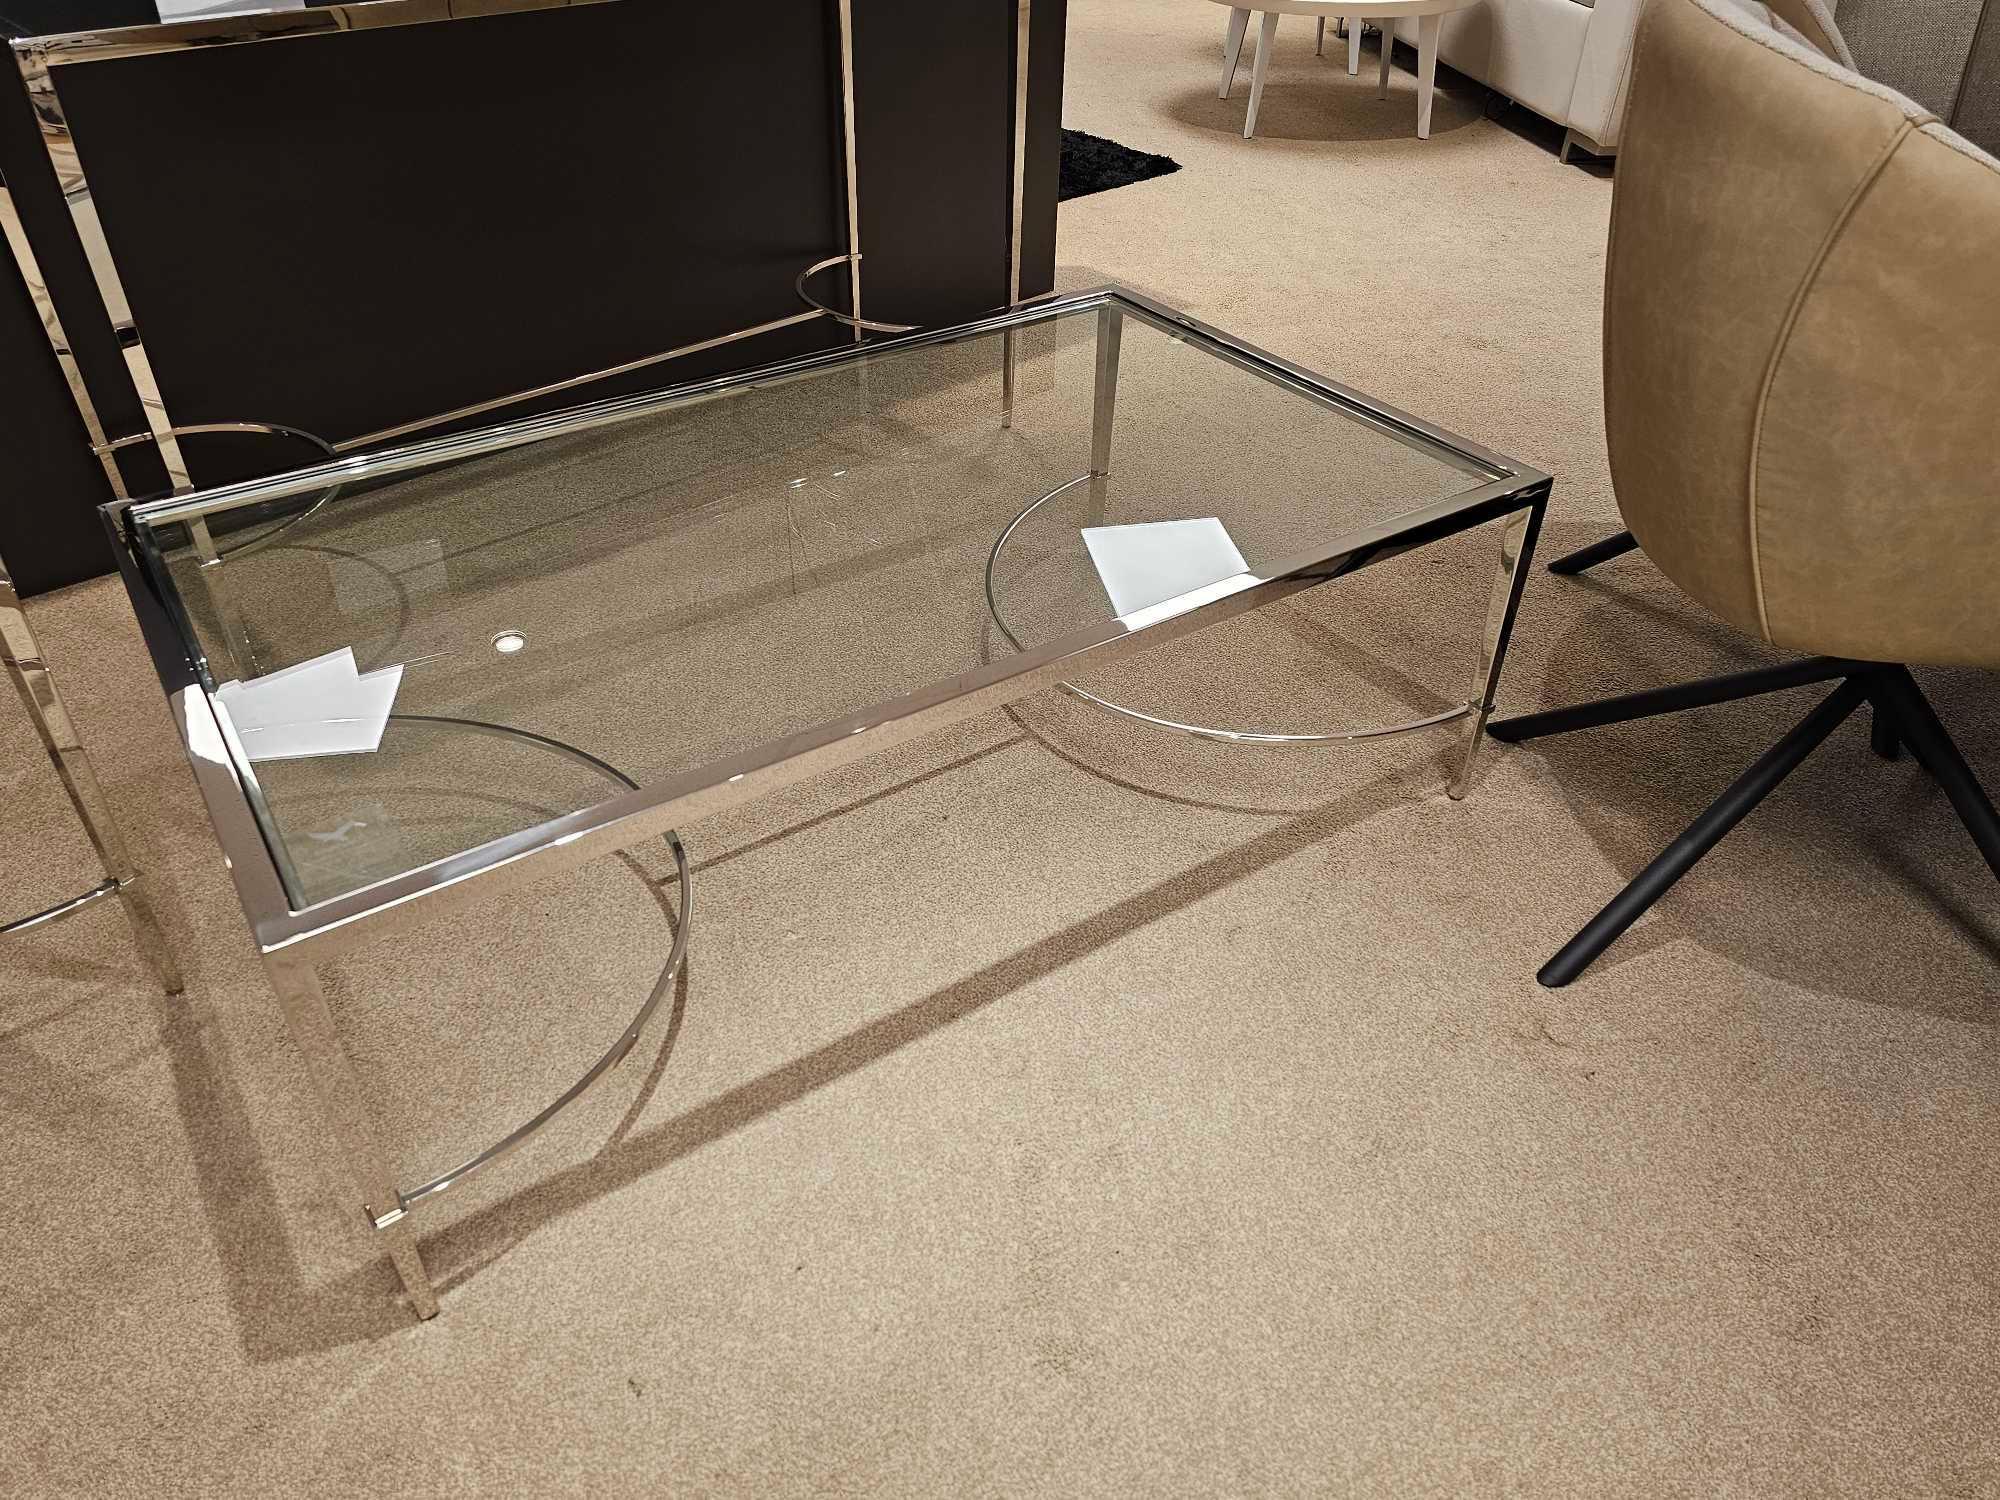 Tokyo Coffee Table by Kesterport The Tokyo coffee table with its clear glass top and a refined - Image 5 of 6